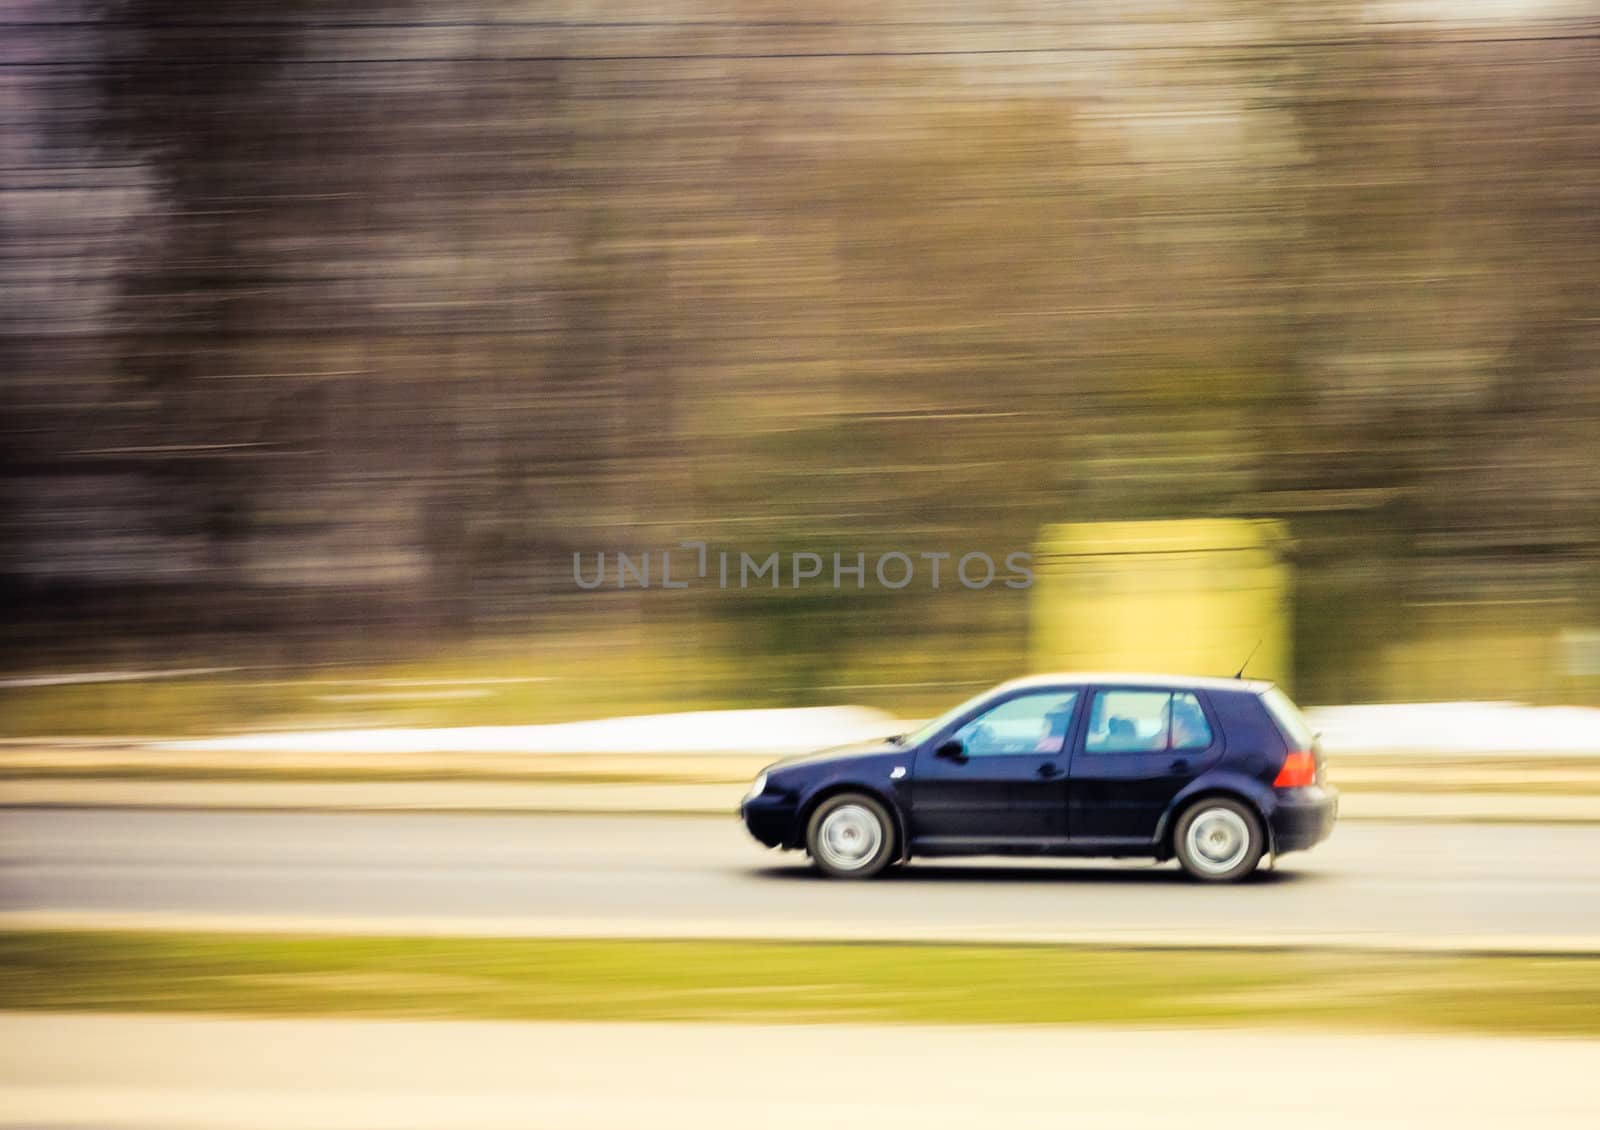 Car on the move, motion blur